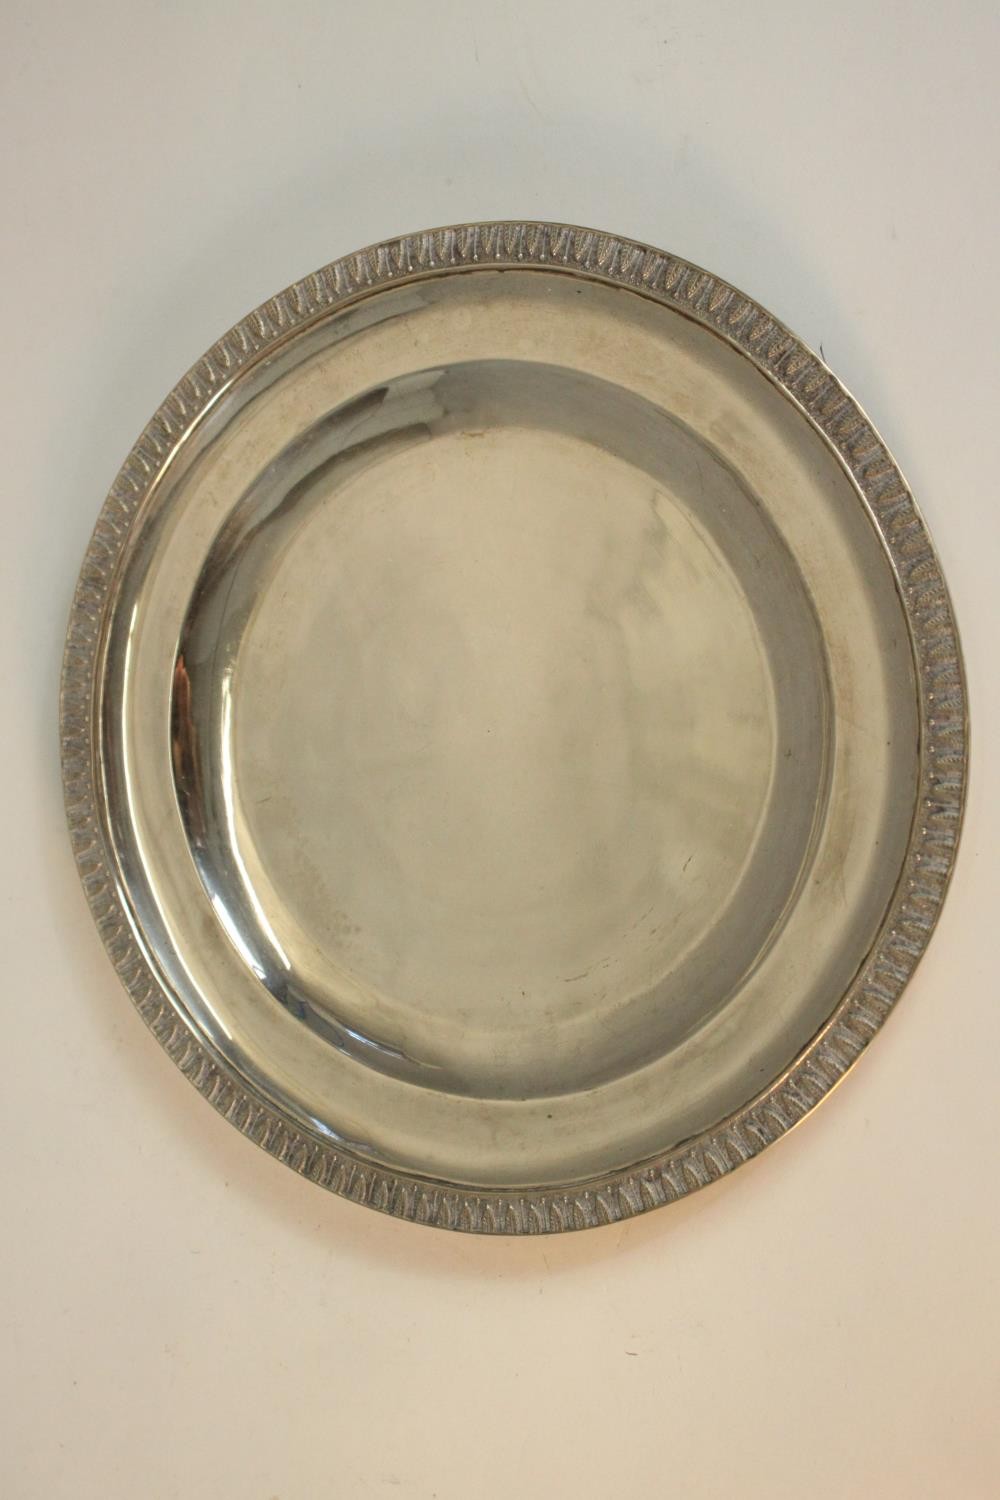 A Polish silver circular tray with stylised leaf design around the rim. Polish assay marks, makers